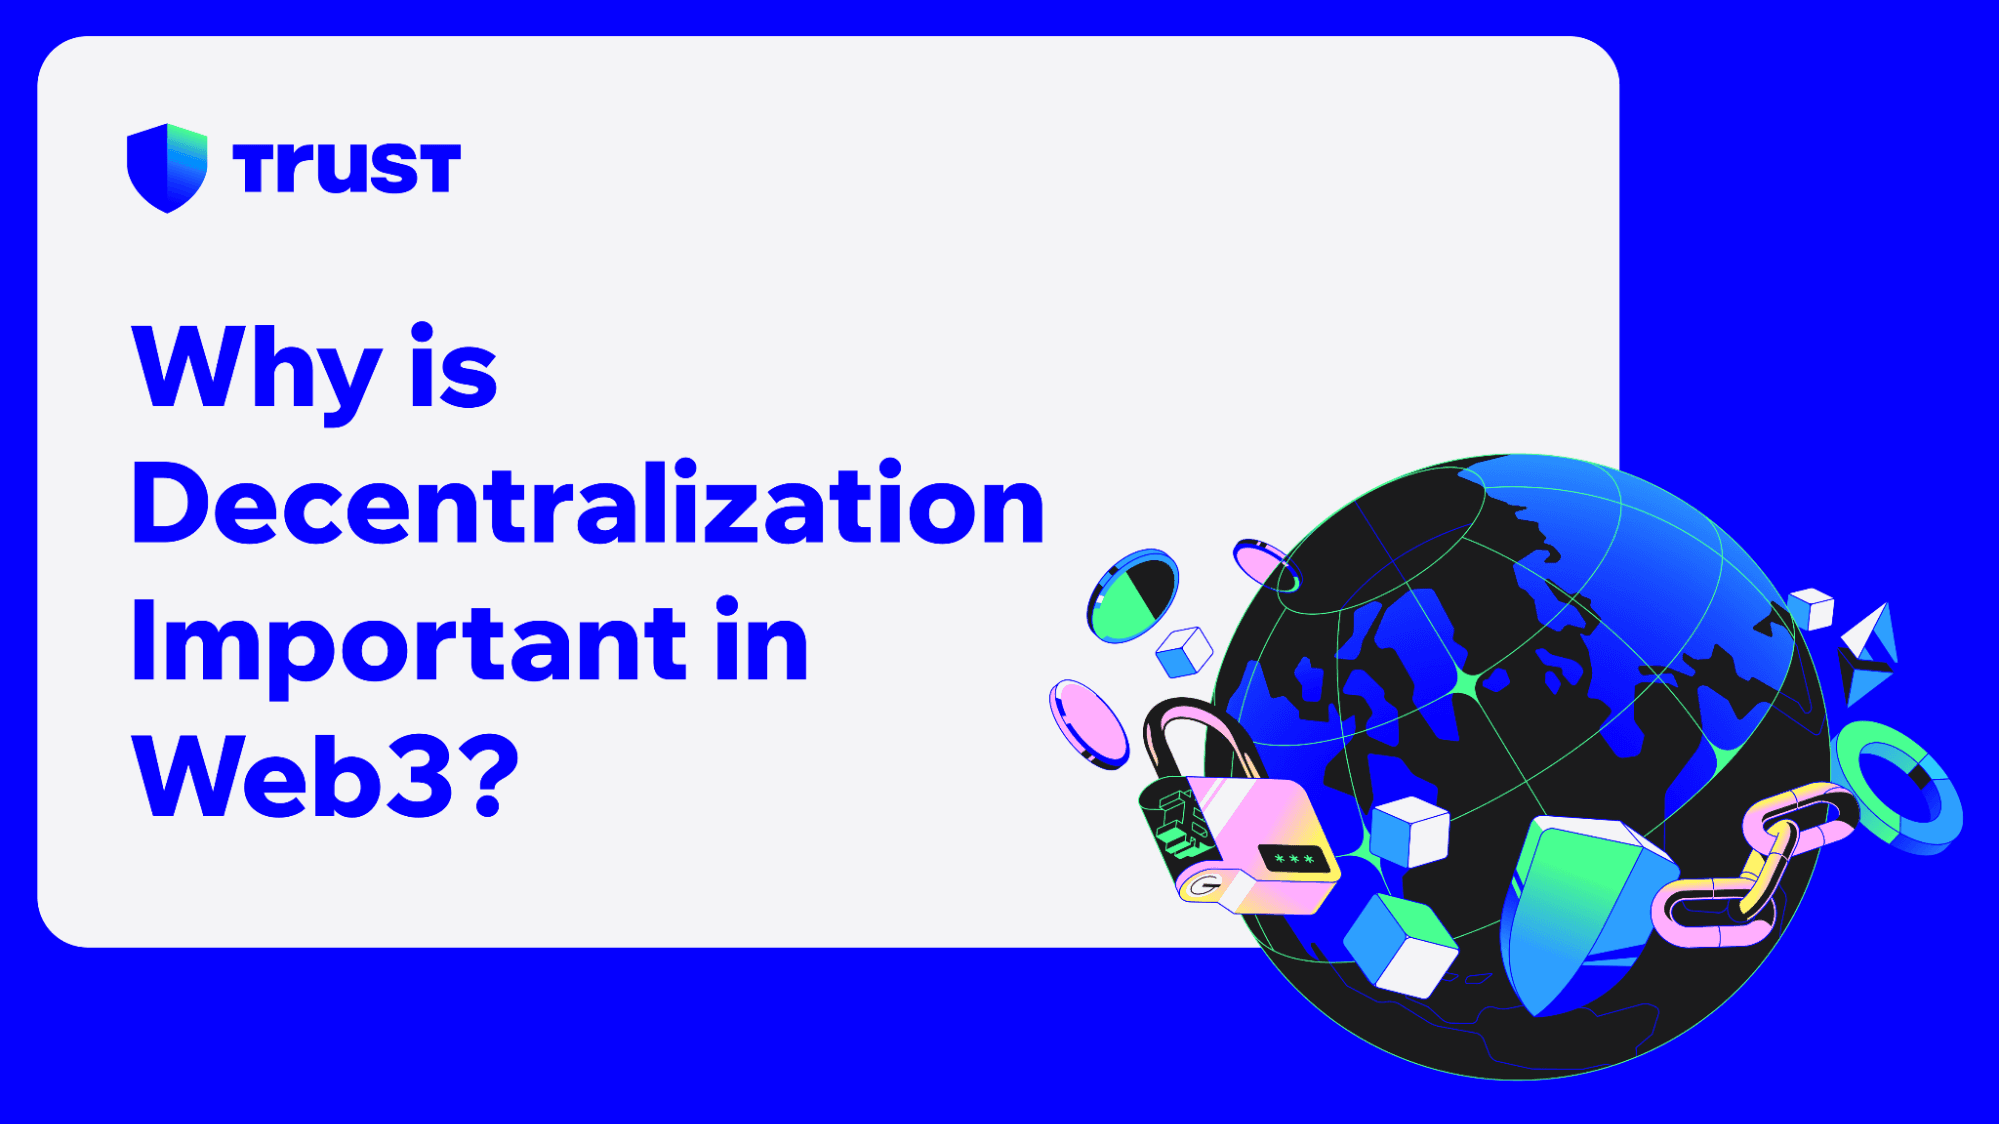 Why is Decentralization Important in Web3?